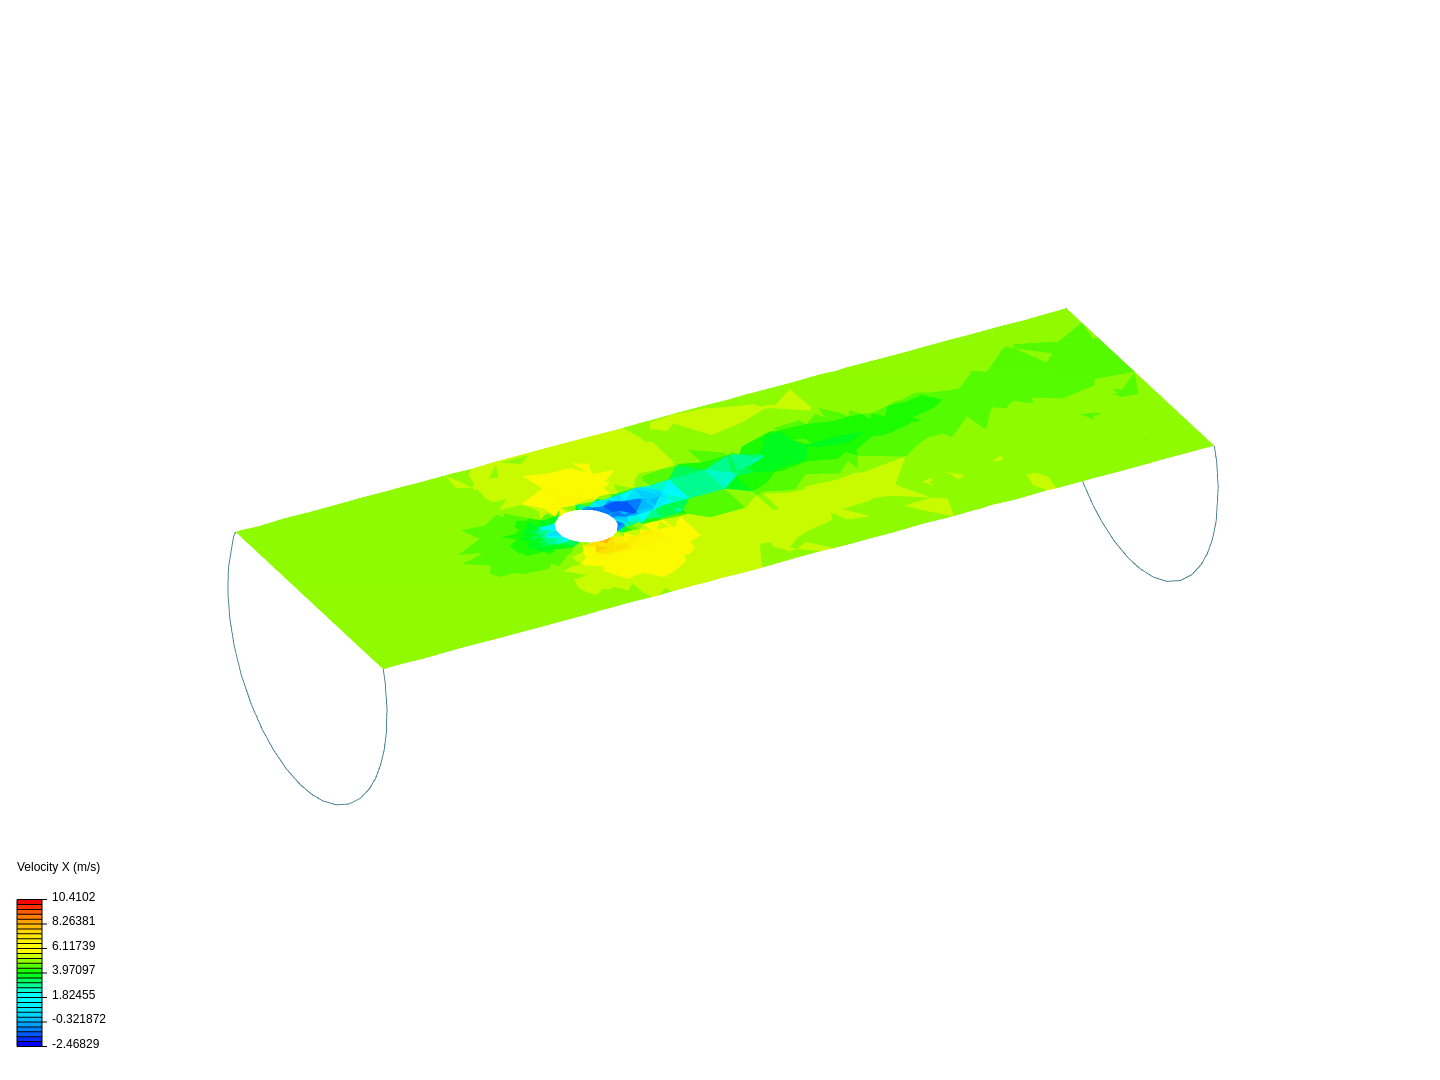 FlowTube with Obstacle image